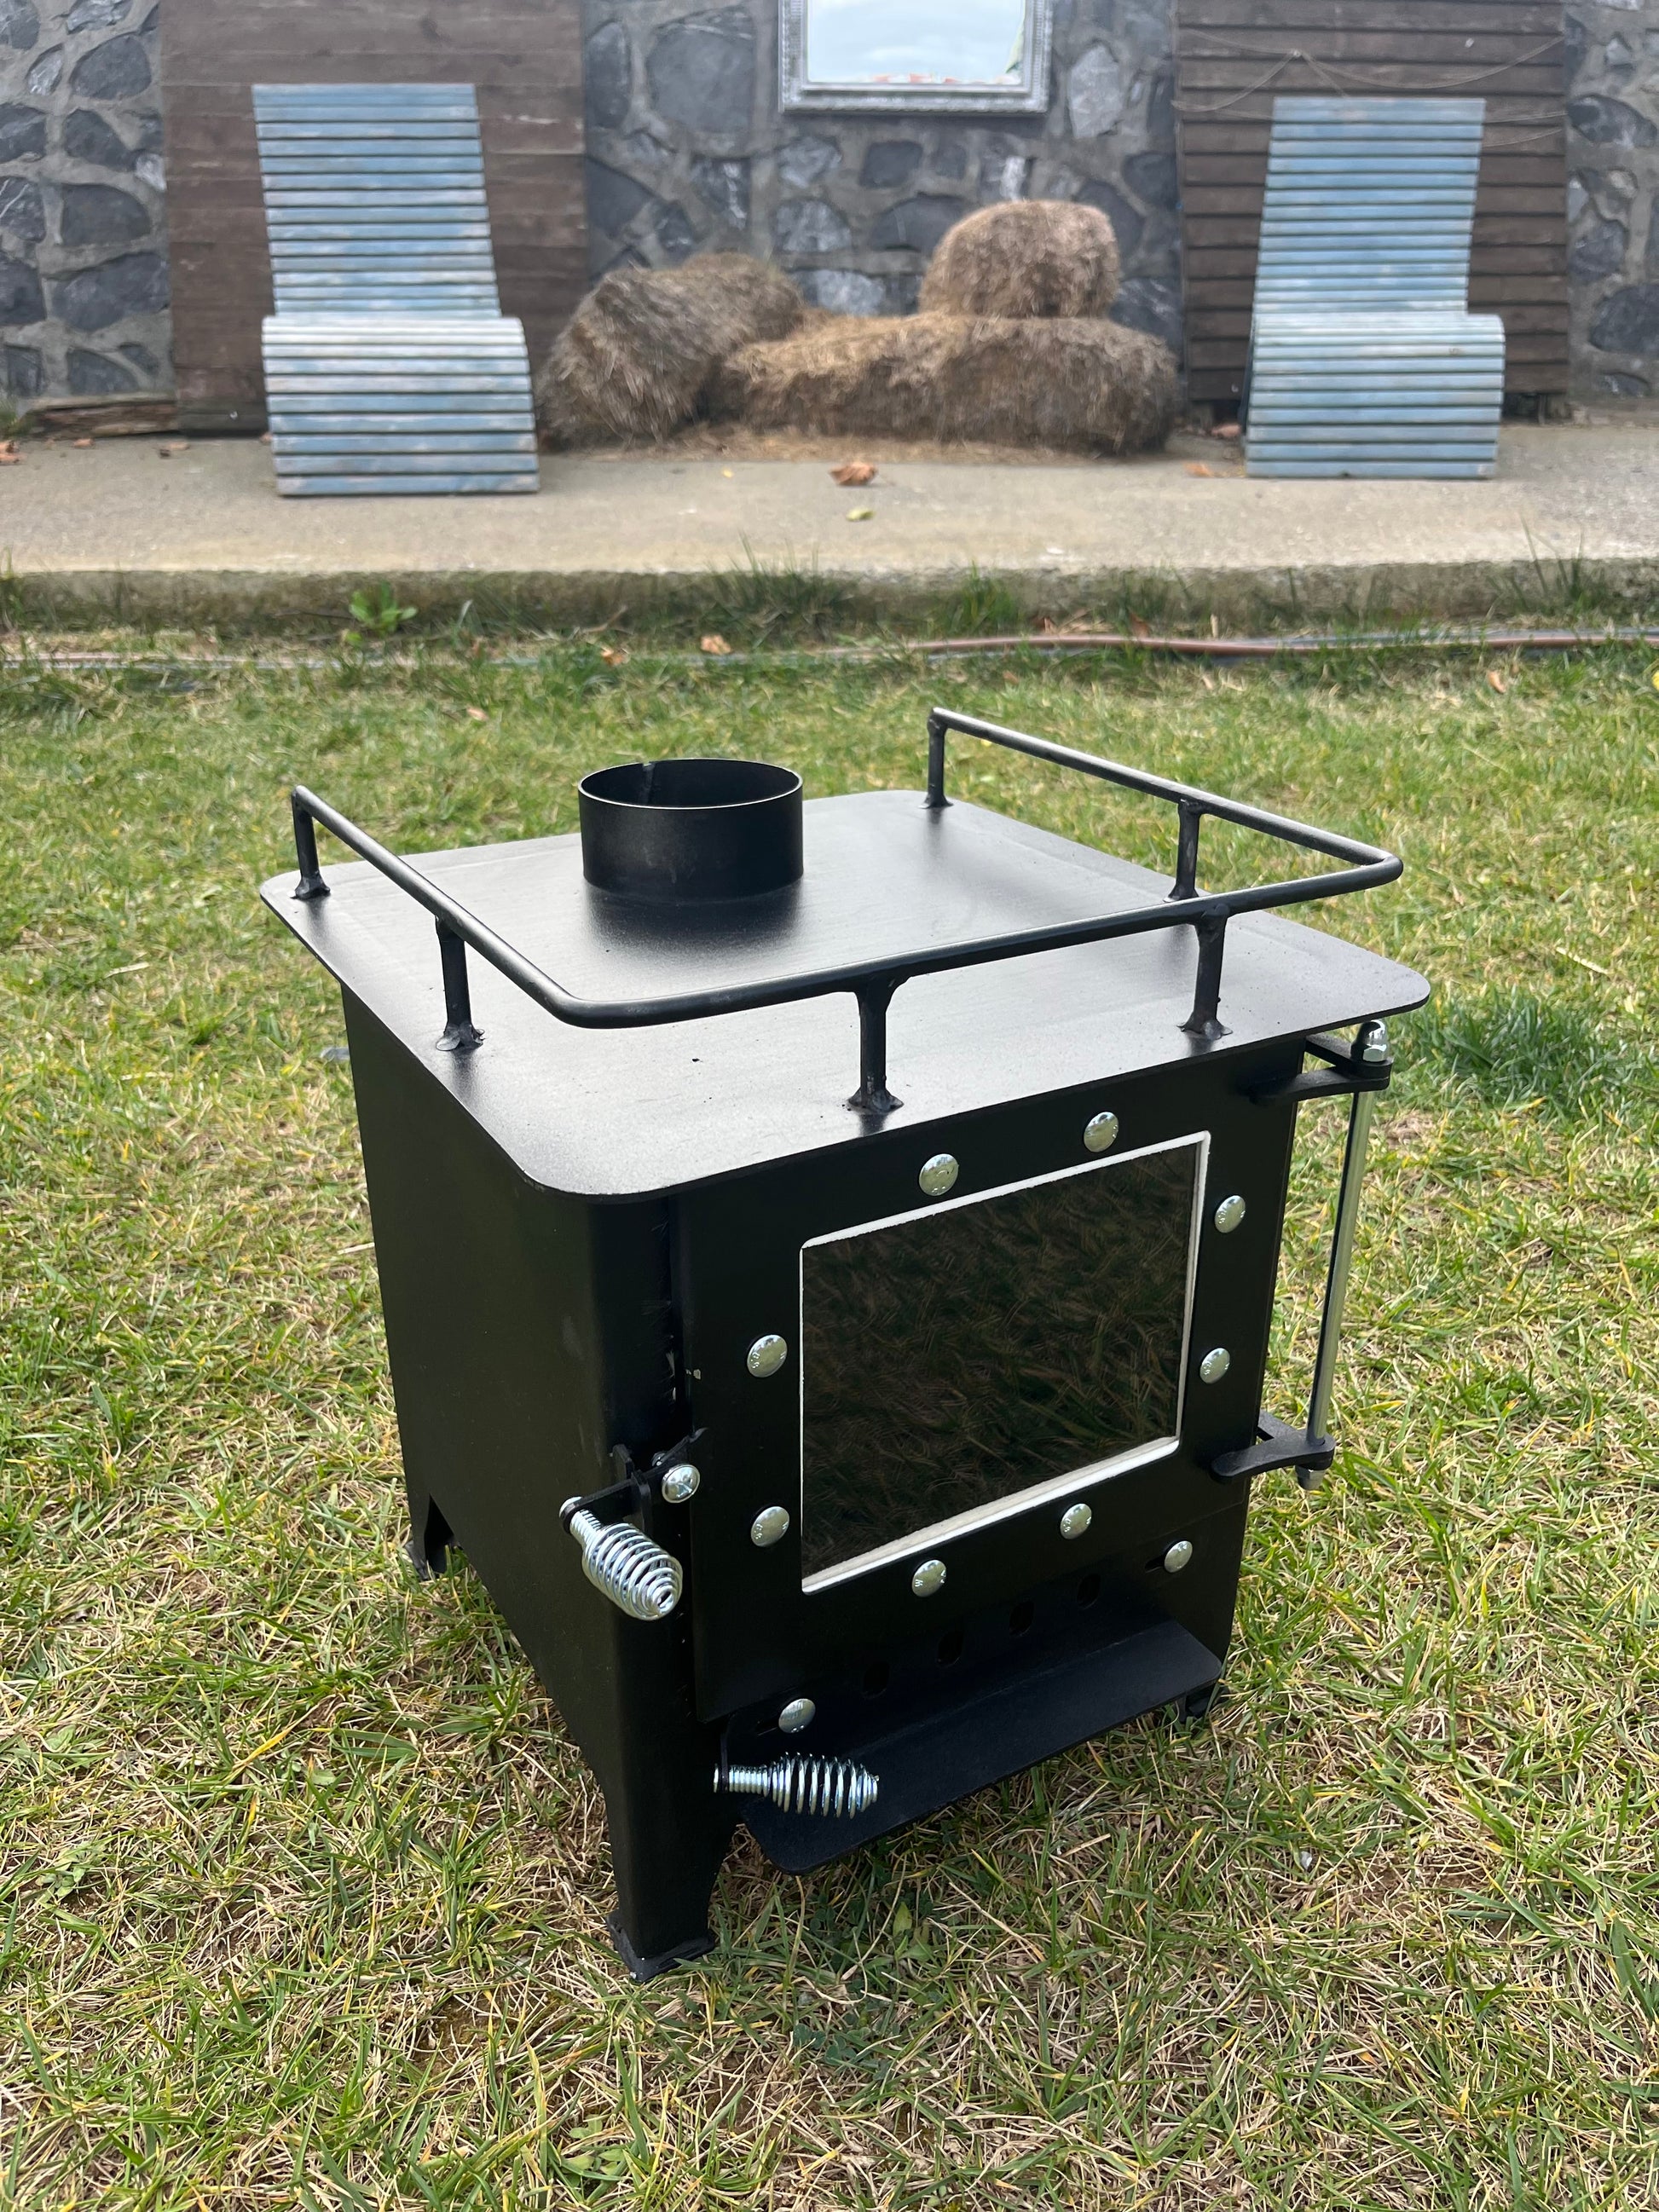 Cute Tiny Wood Stove, Camping, Bunkie Wood Stove, Campervan Stove, Caravan,  Cabin Wood Stove, Tiny House Stove, Tent Stove, Outdoor Stove